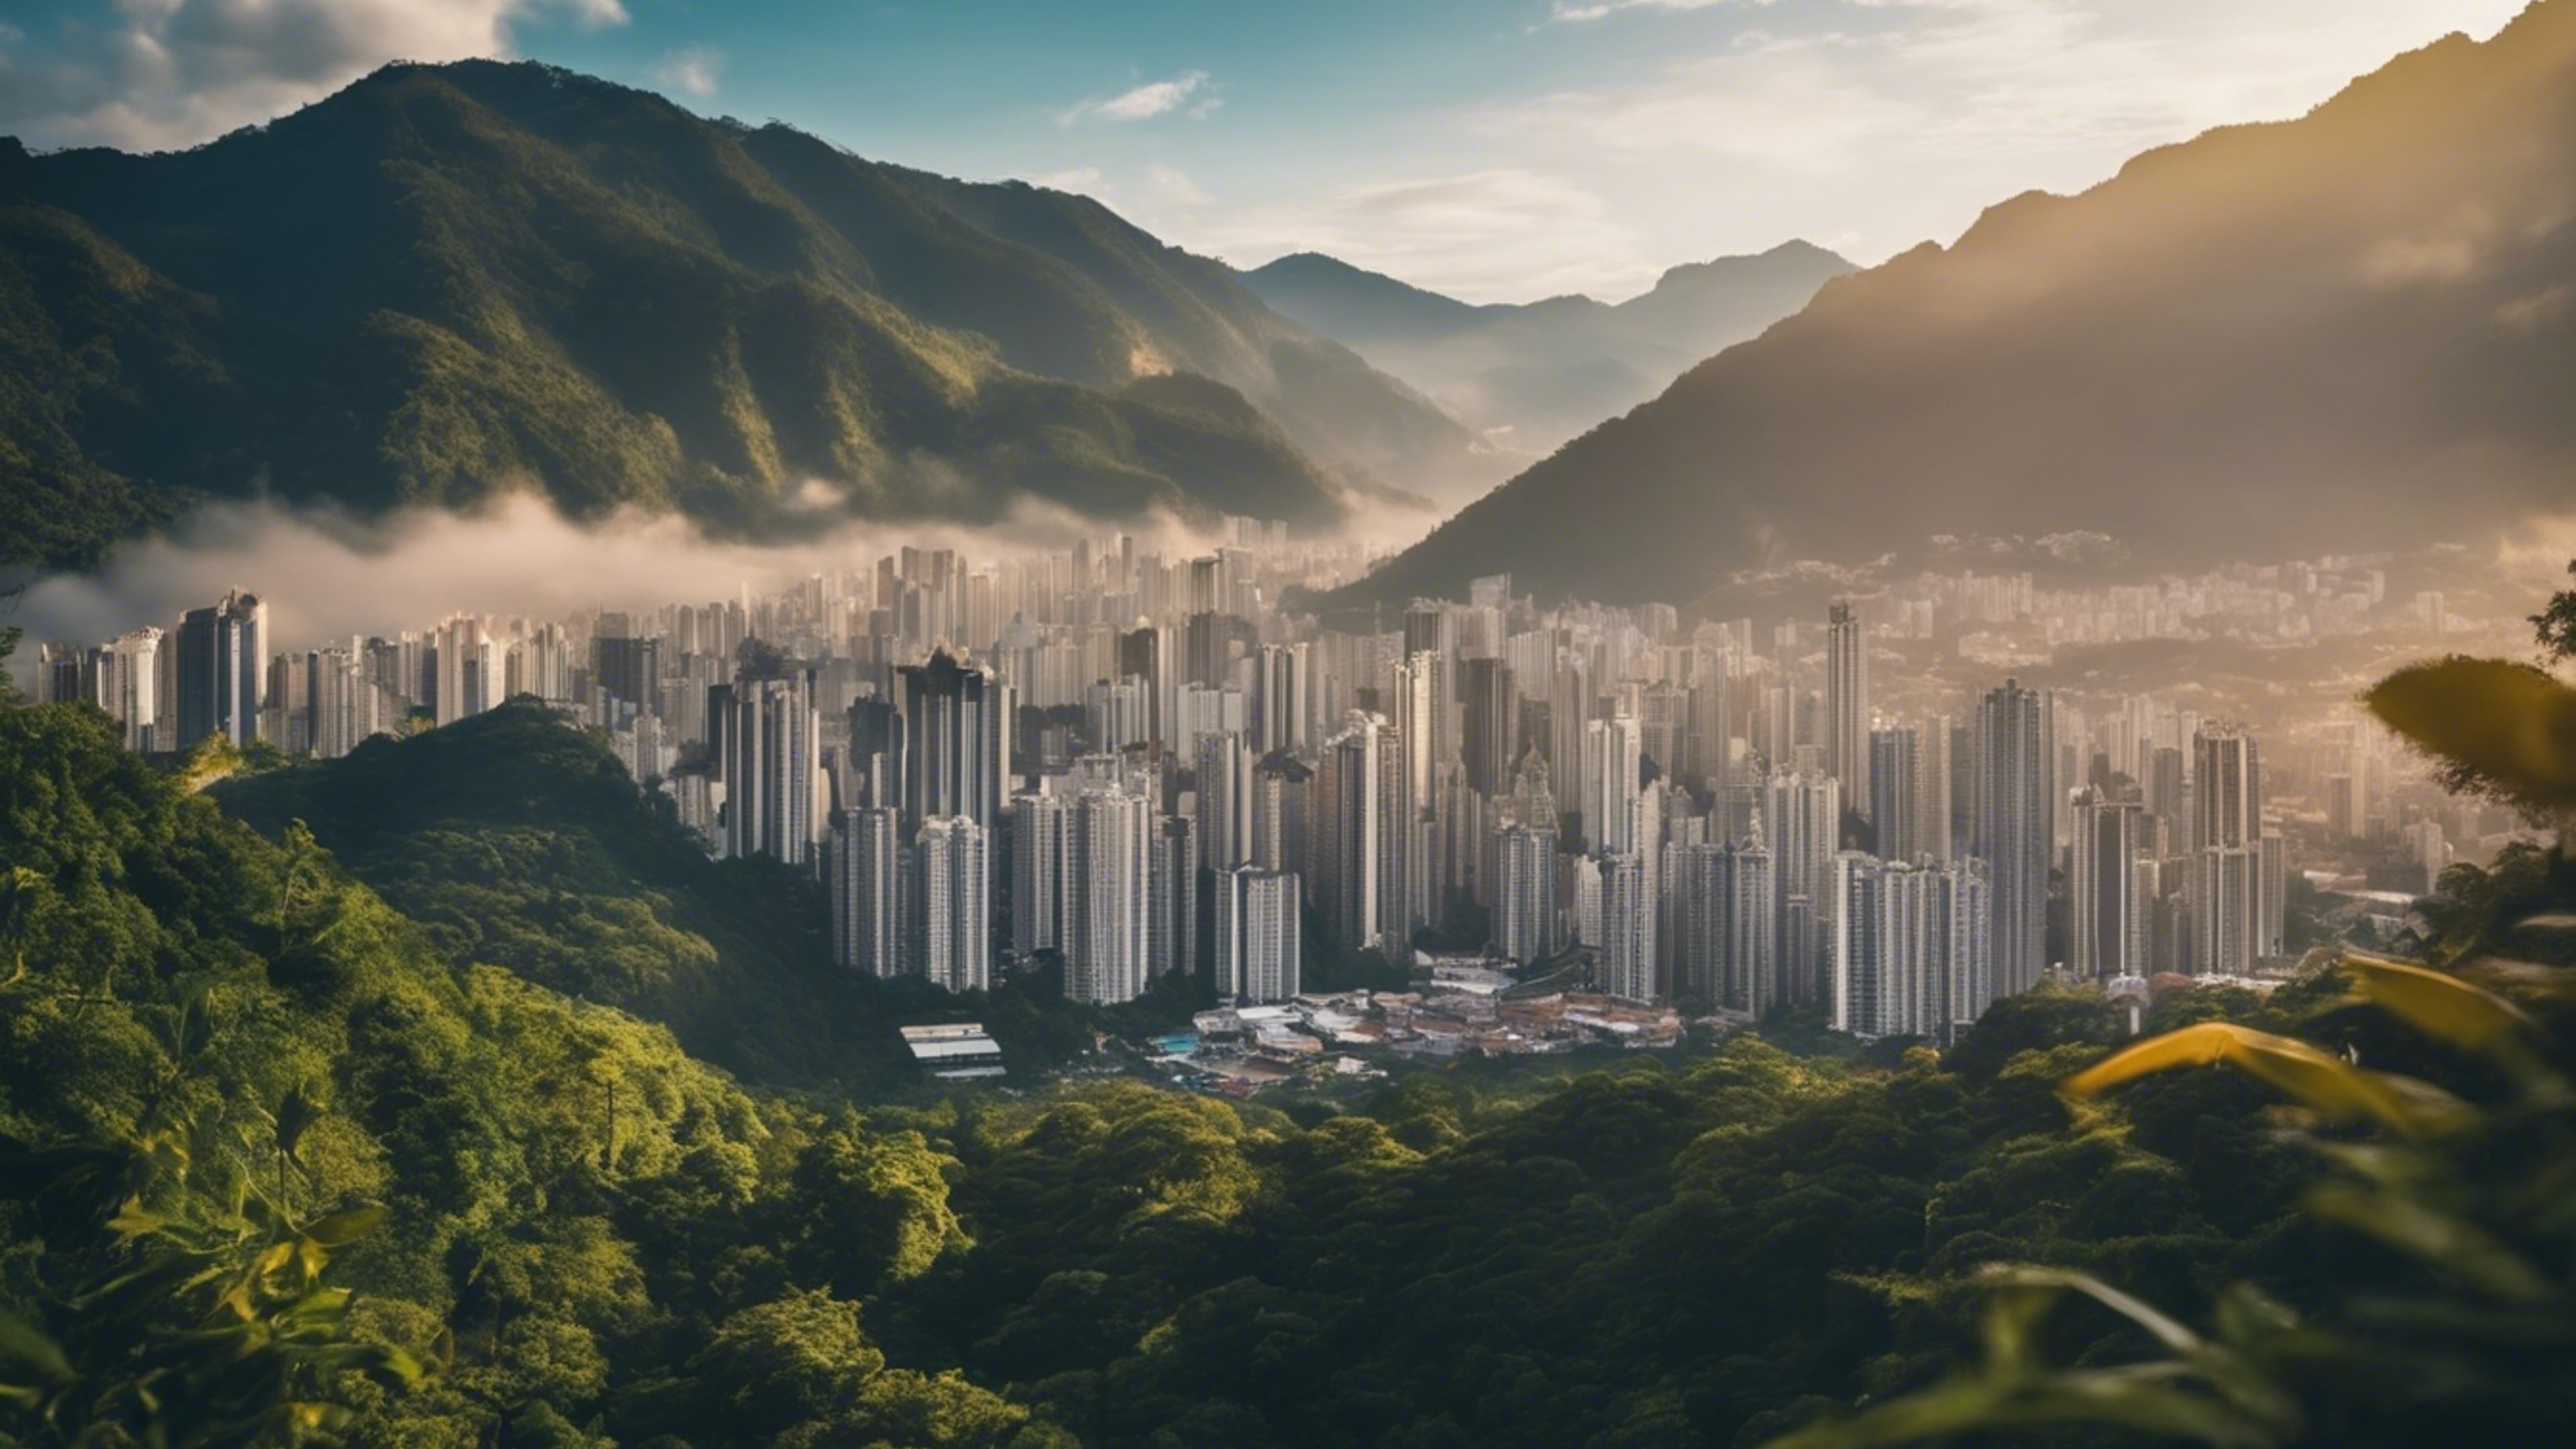 The enchanting skyline of a mountain range rainforest city in the heart of nature. Обои[97852b95a374431baf05]